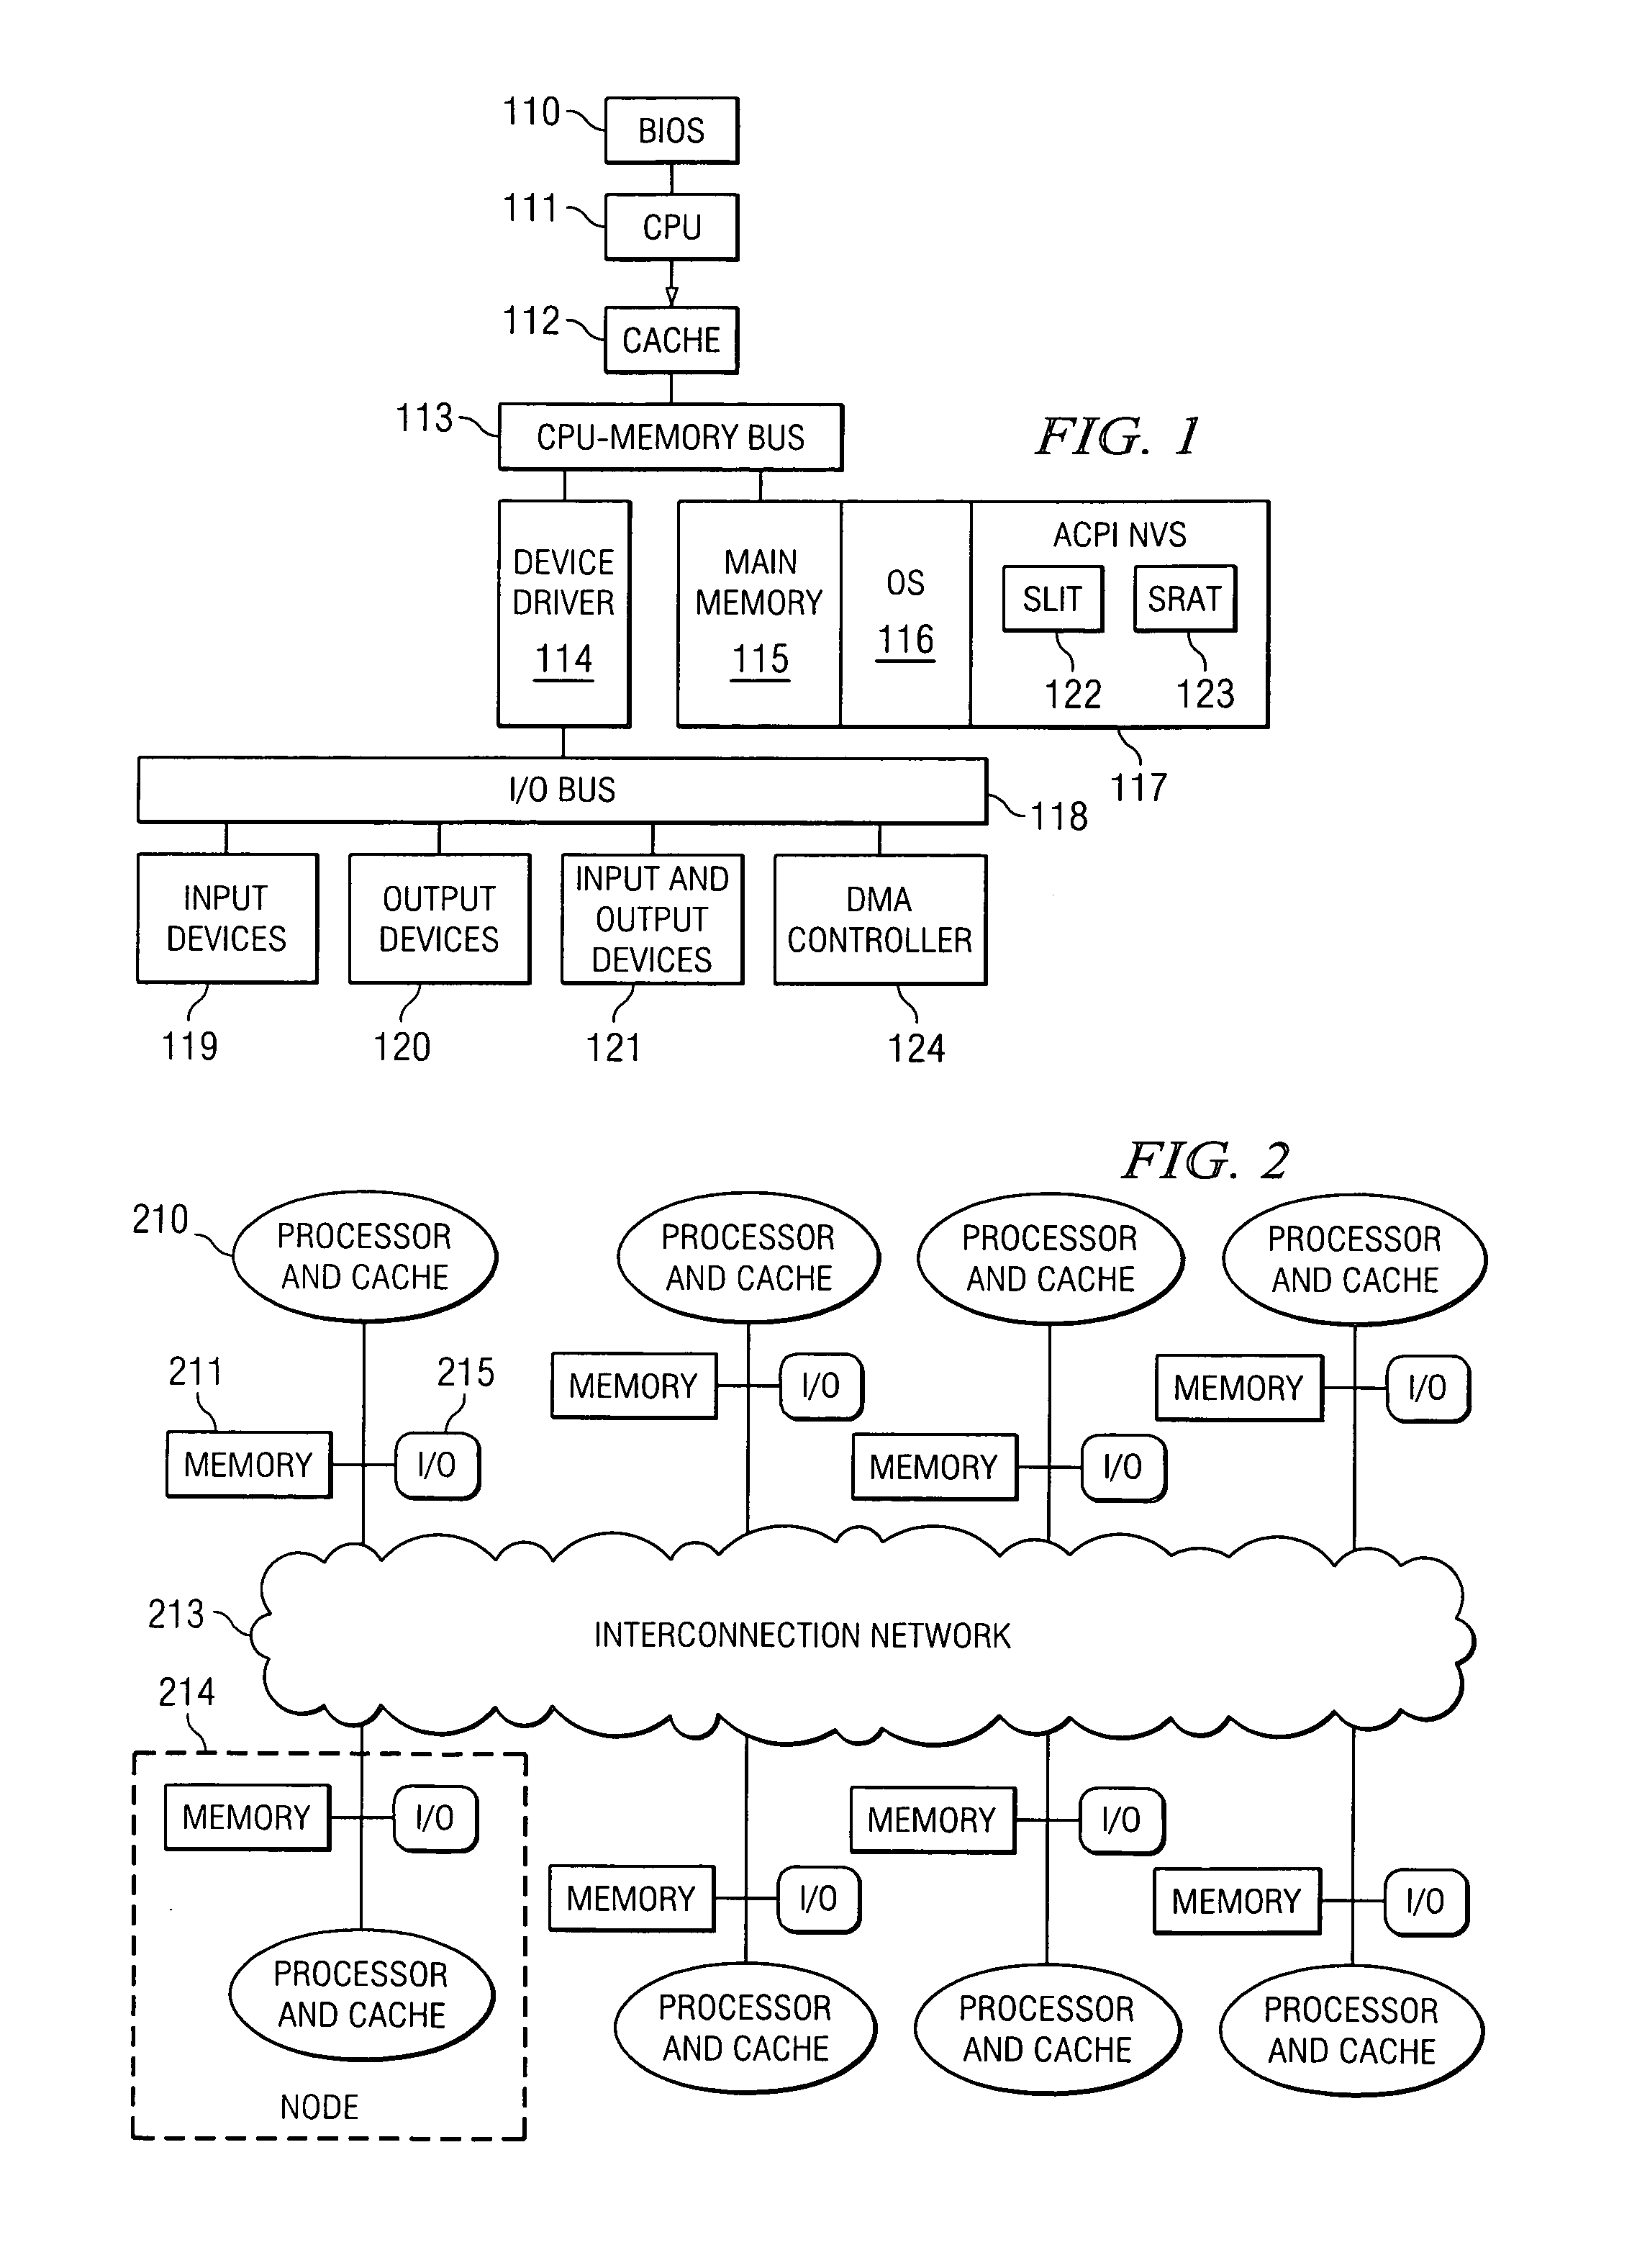 Optimized memory allocator for a multiprocessor computer system